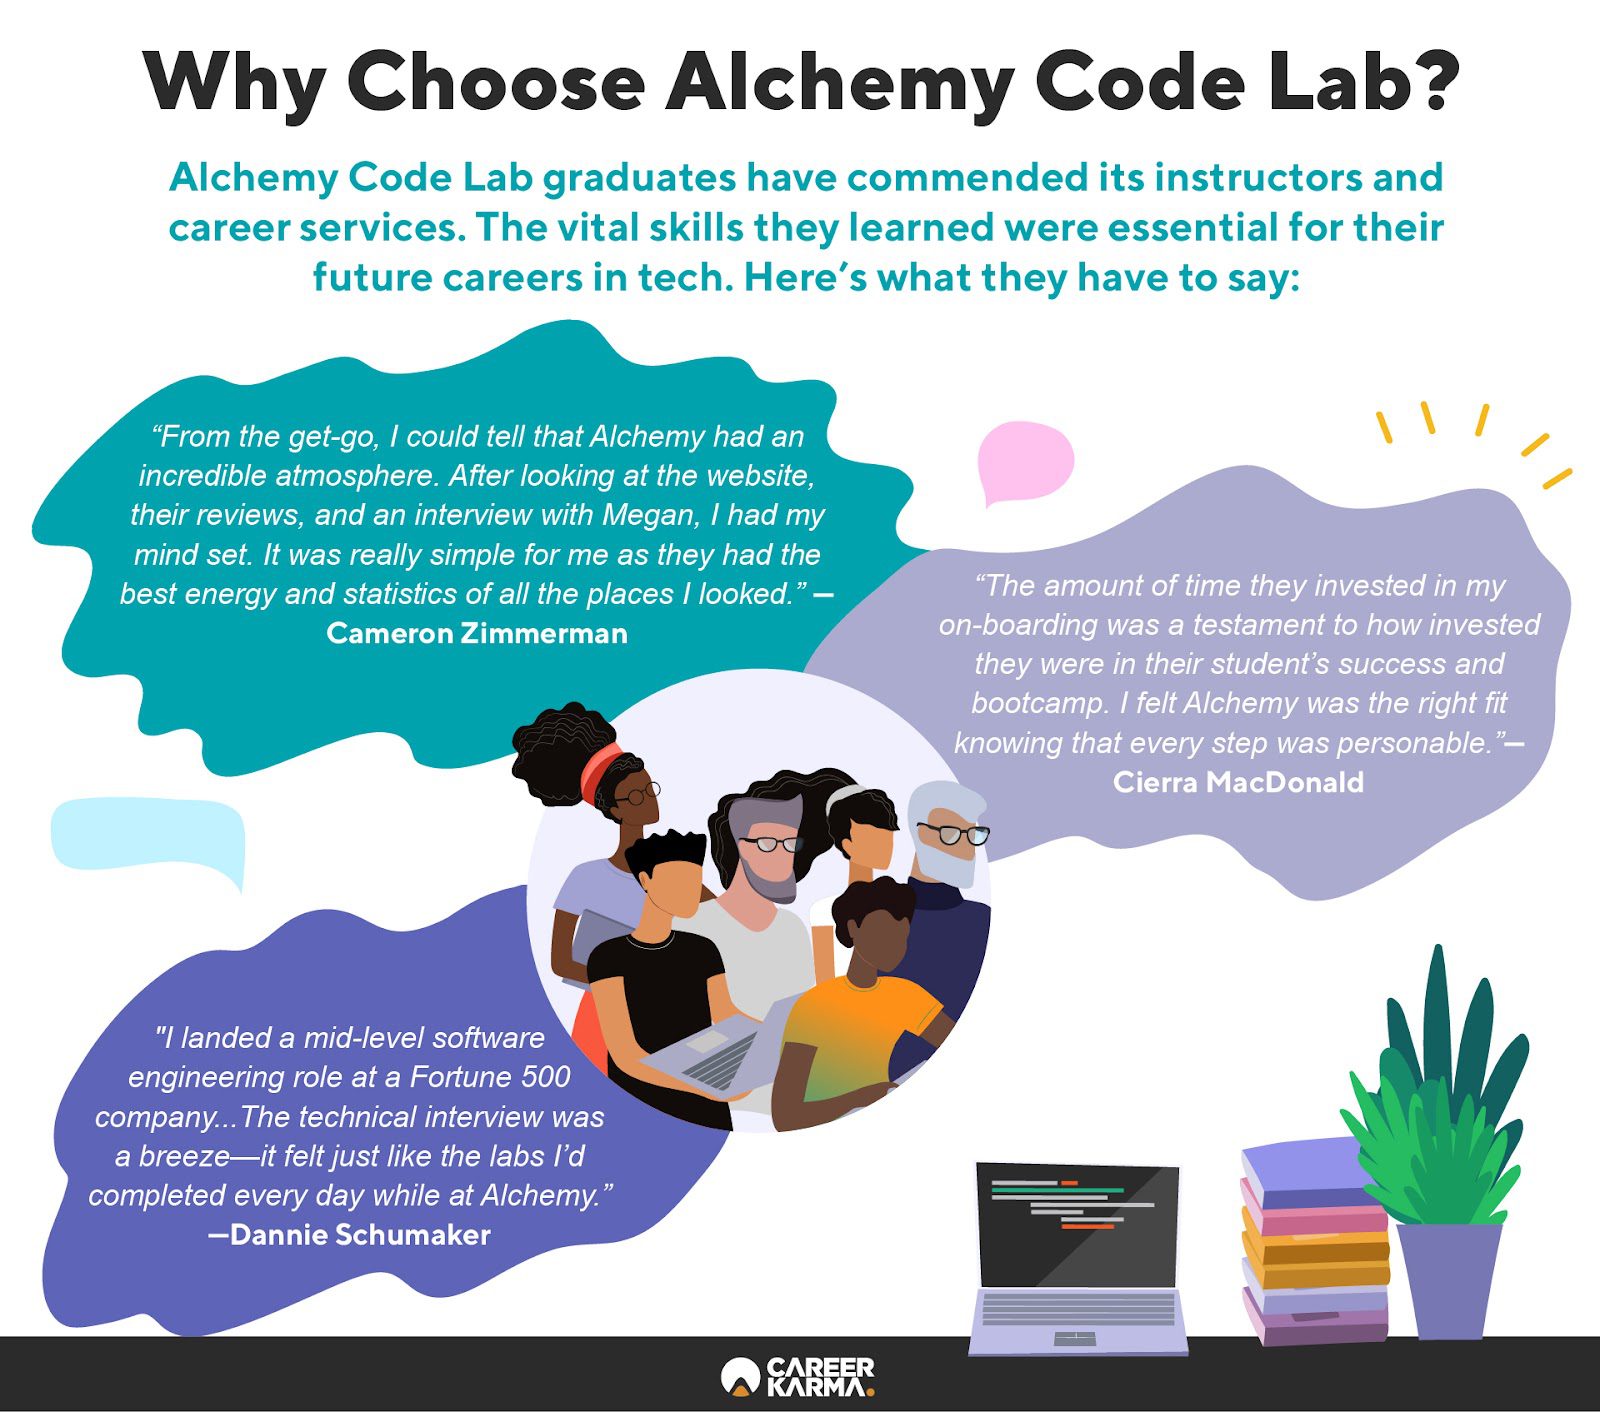 An infographic highlighting Alchemy Code Lab alumni reviews